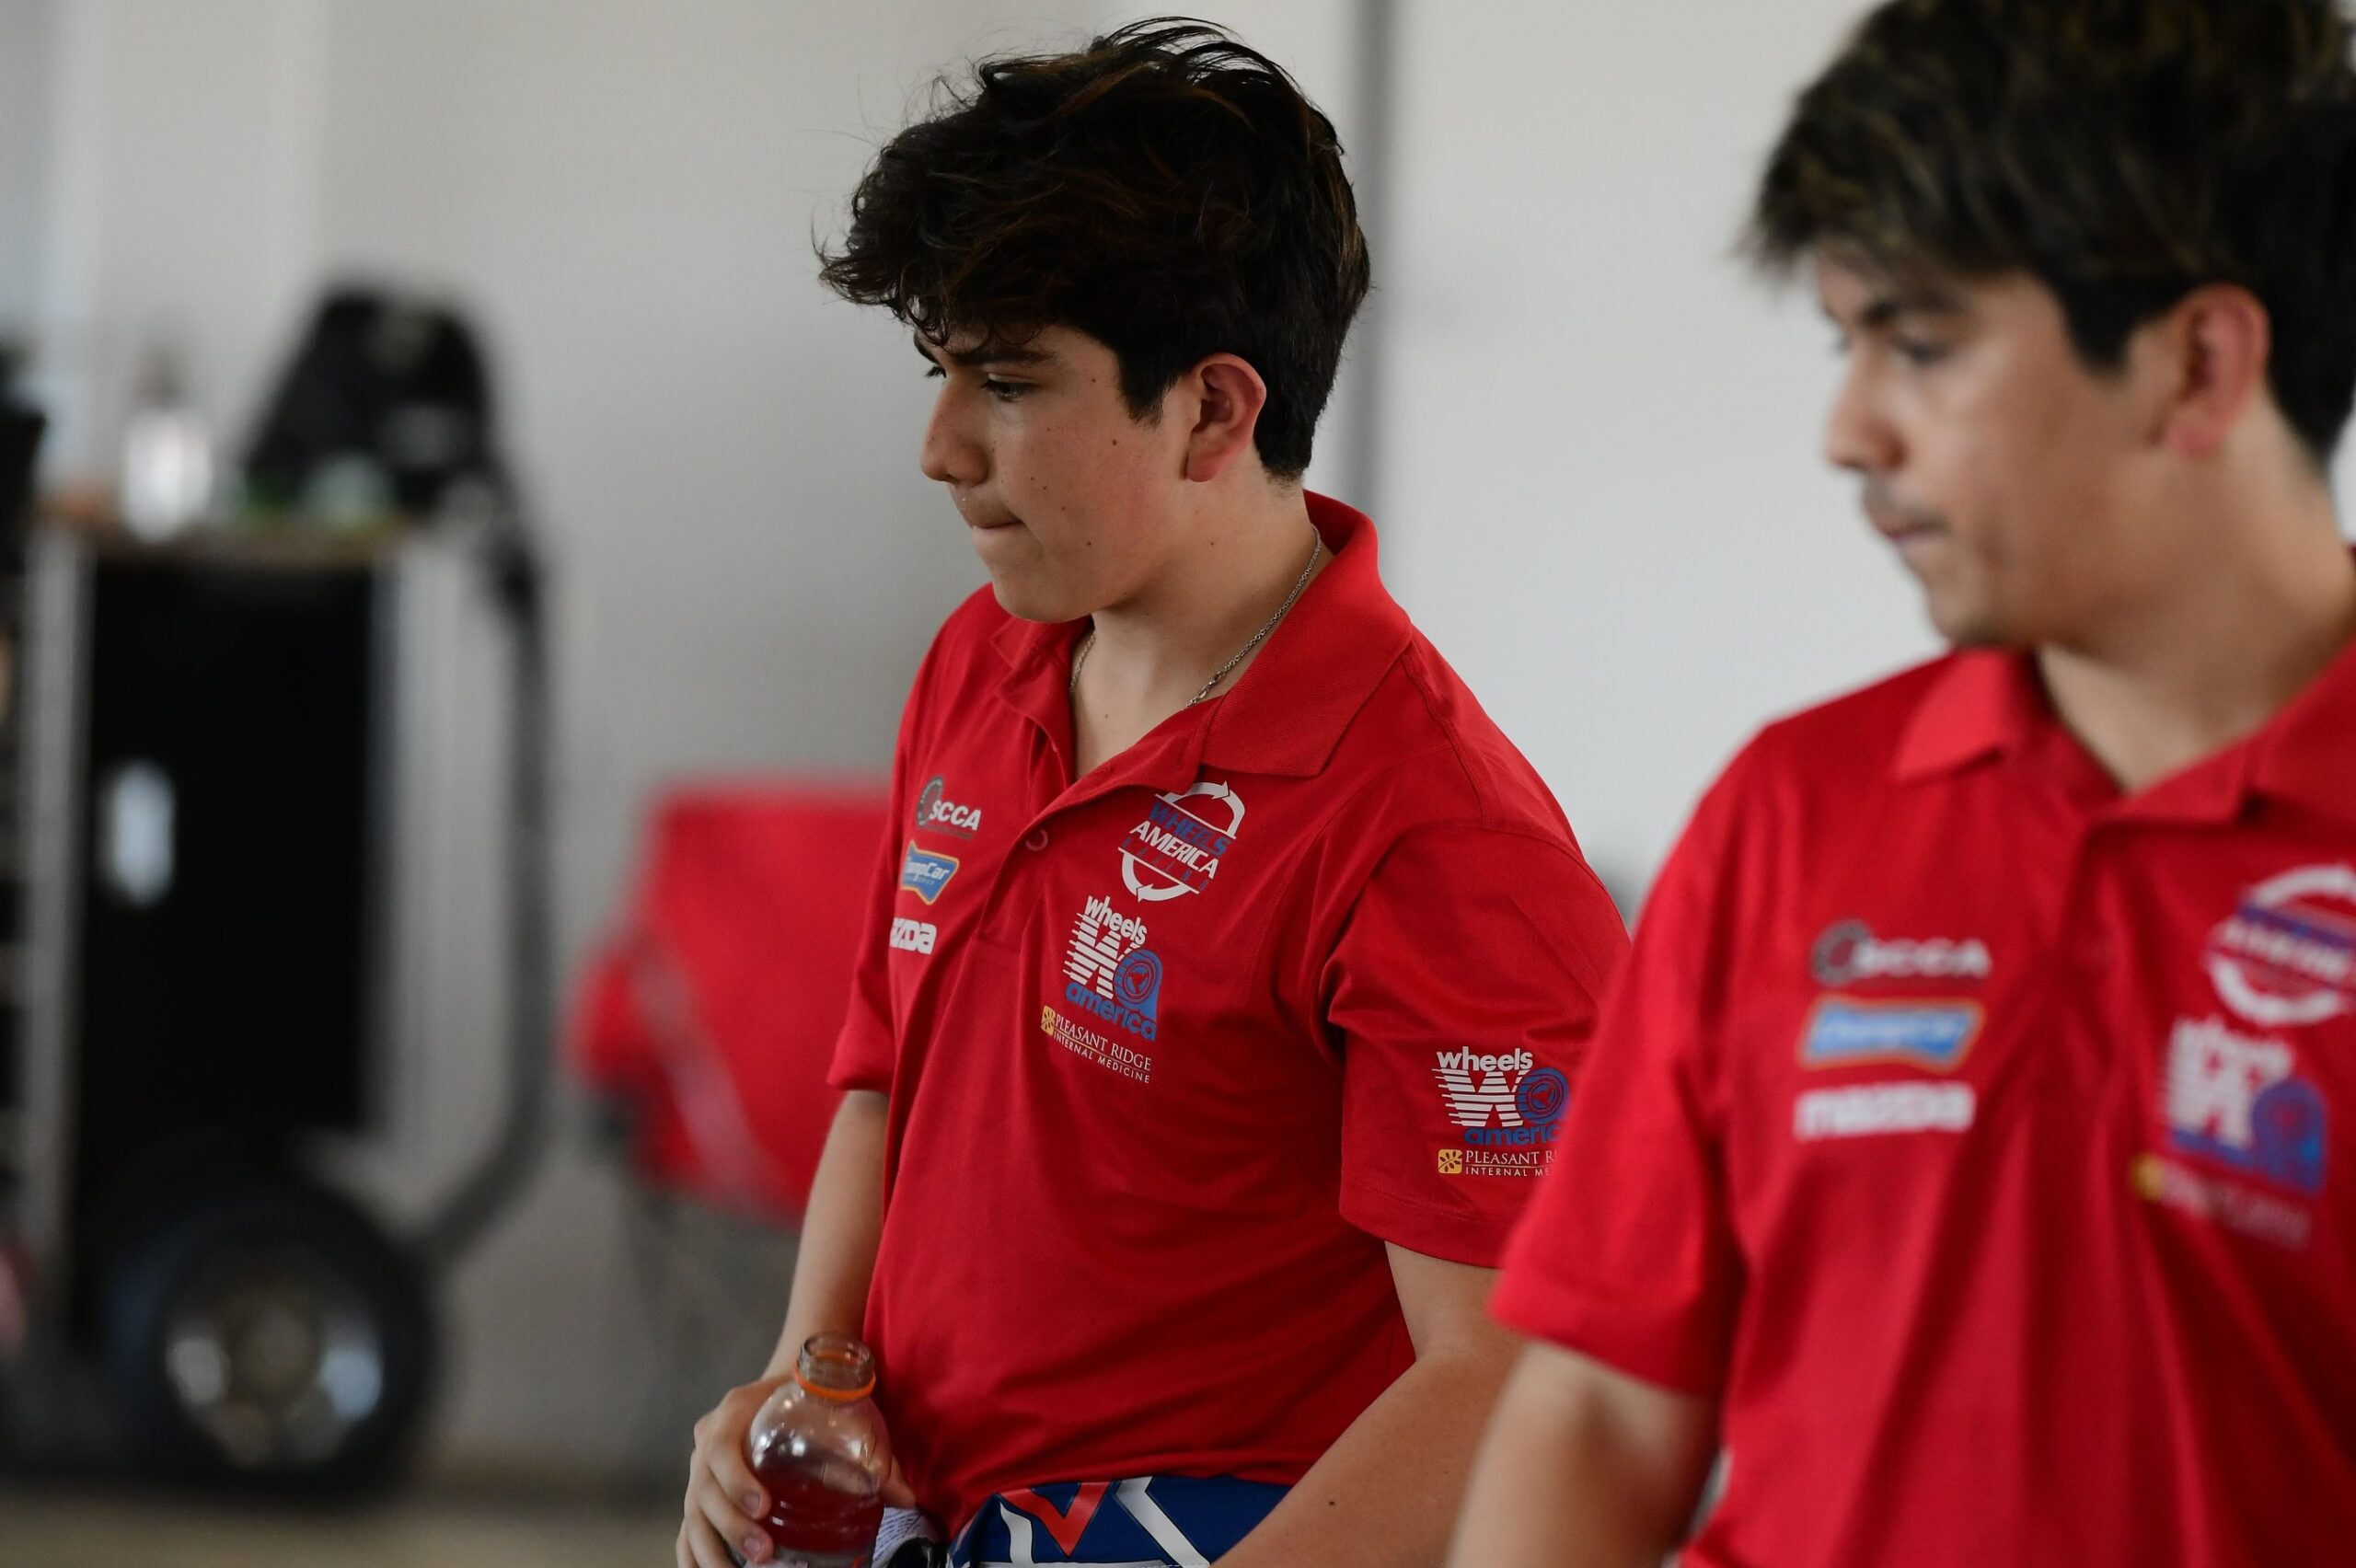 Max and Miles Hewitt with Wheels America Racing at SCCA MAJORS at Homestead Miami Speedway